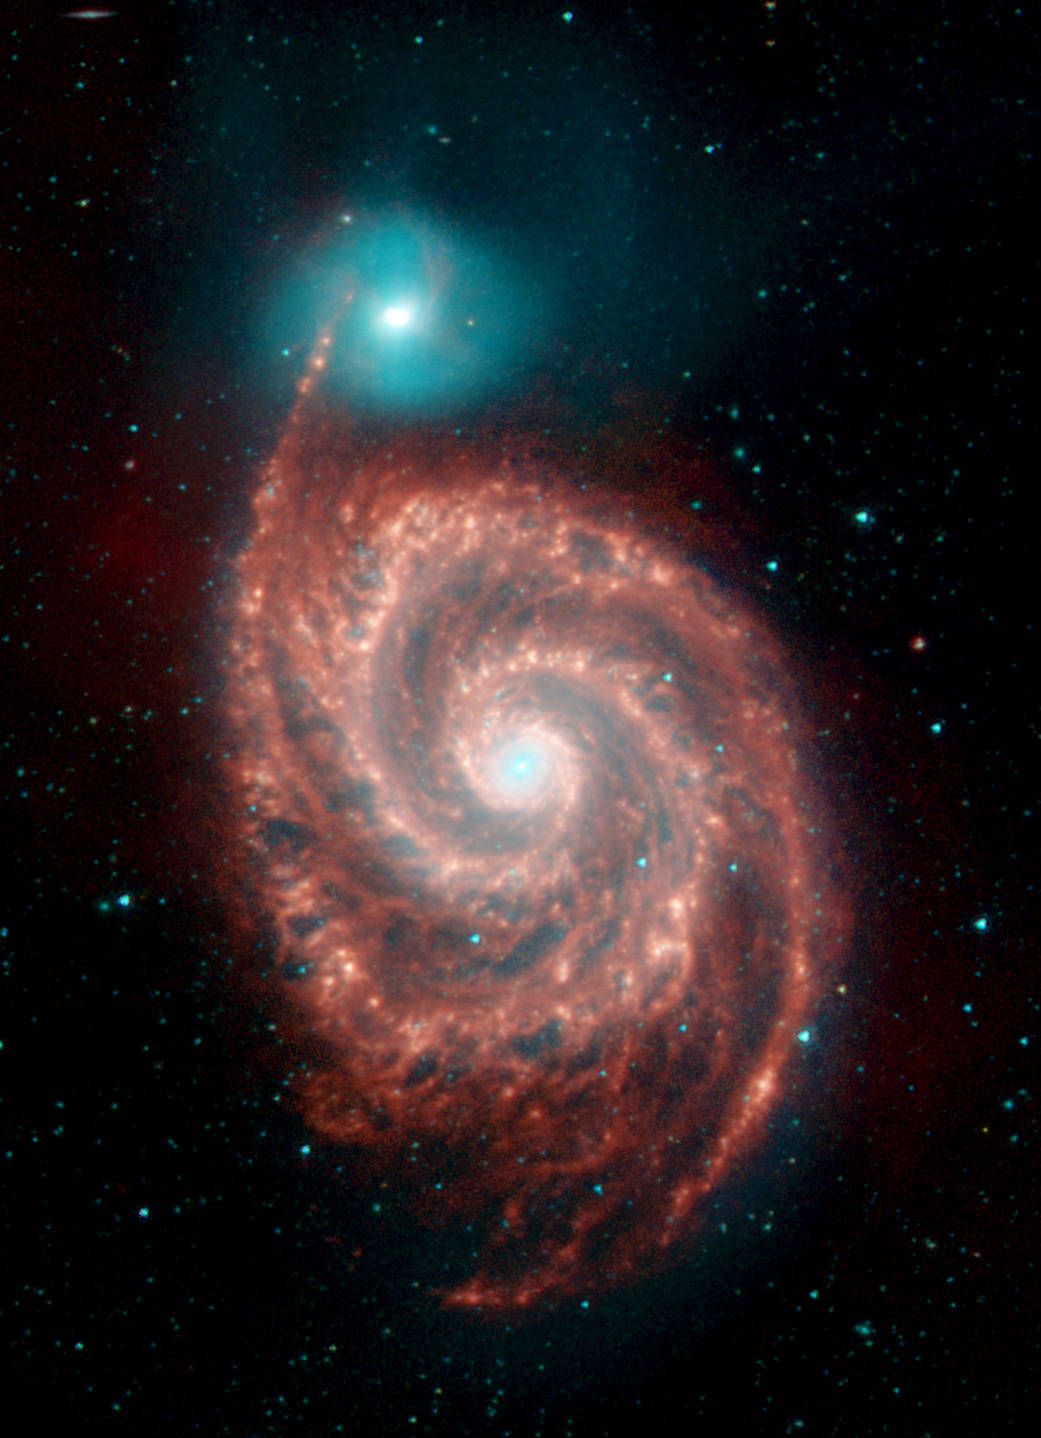 Infrared image of whirlpool galaxy